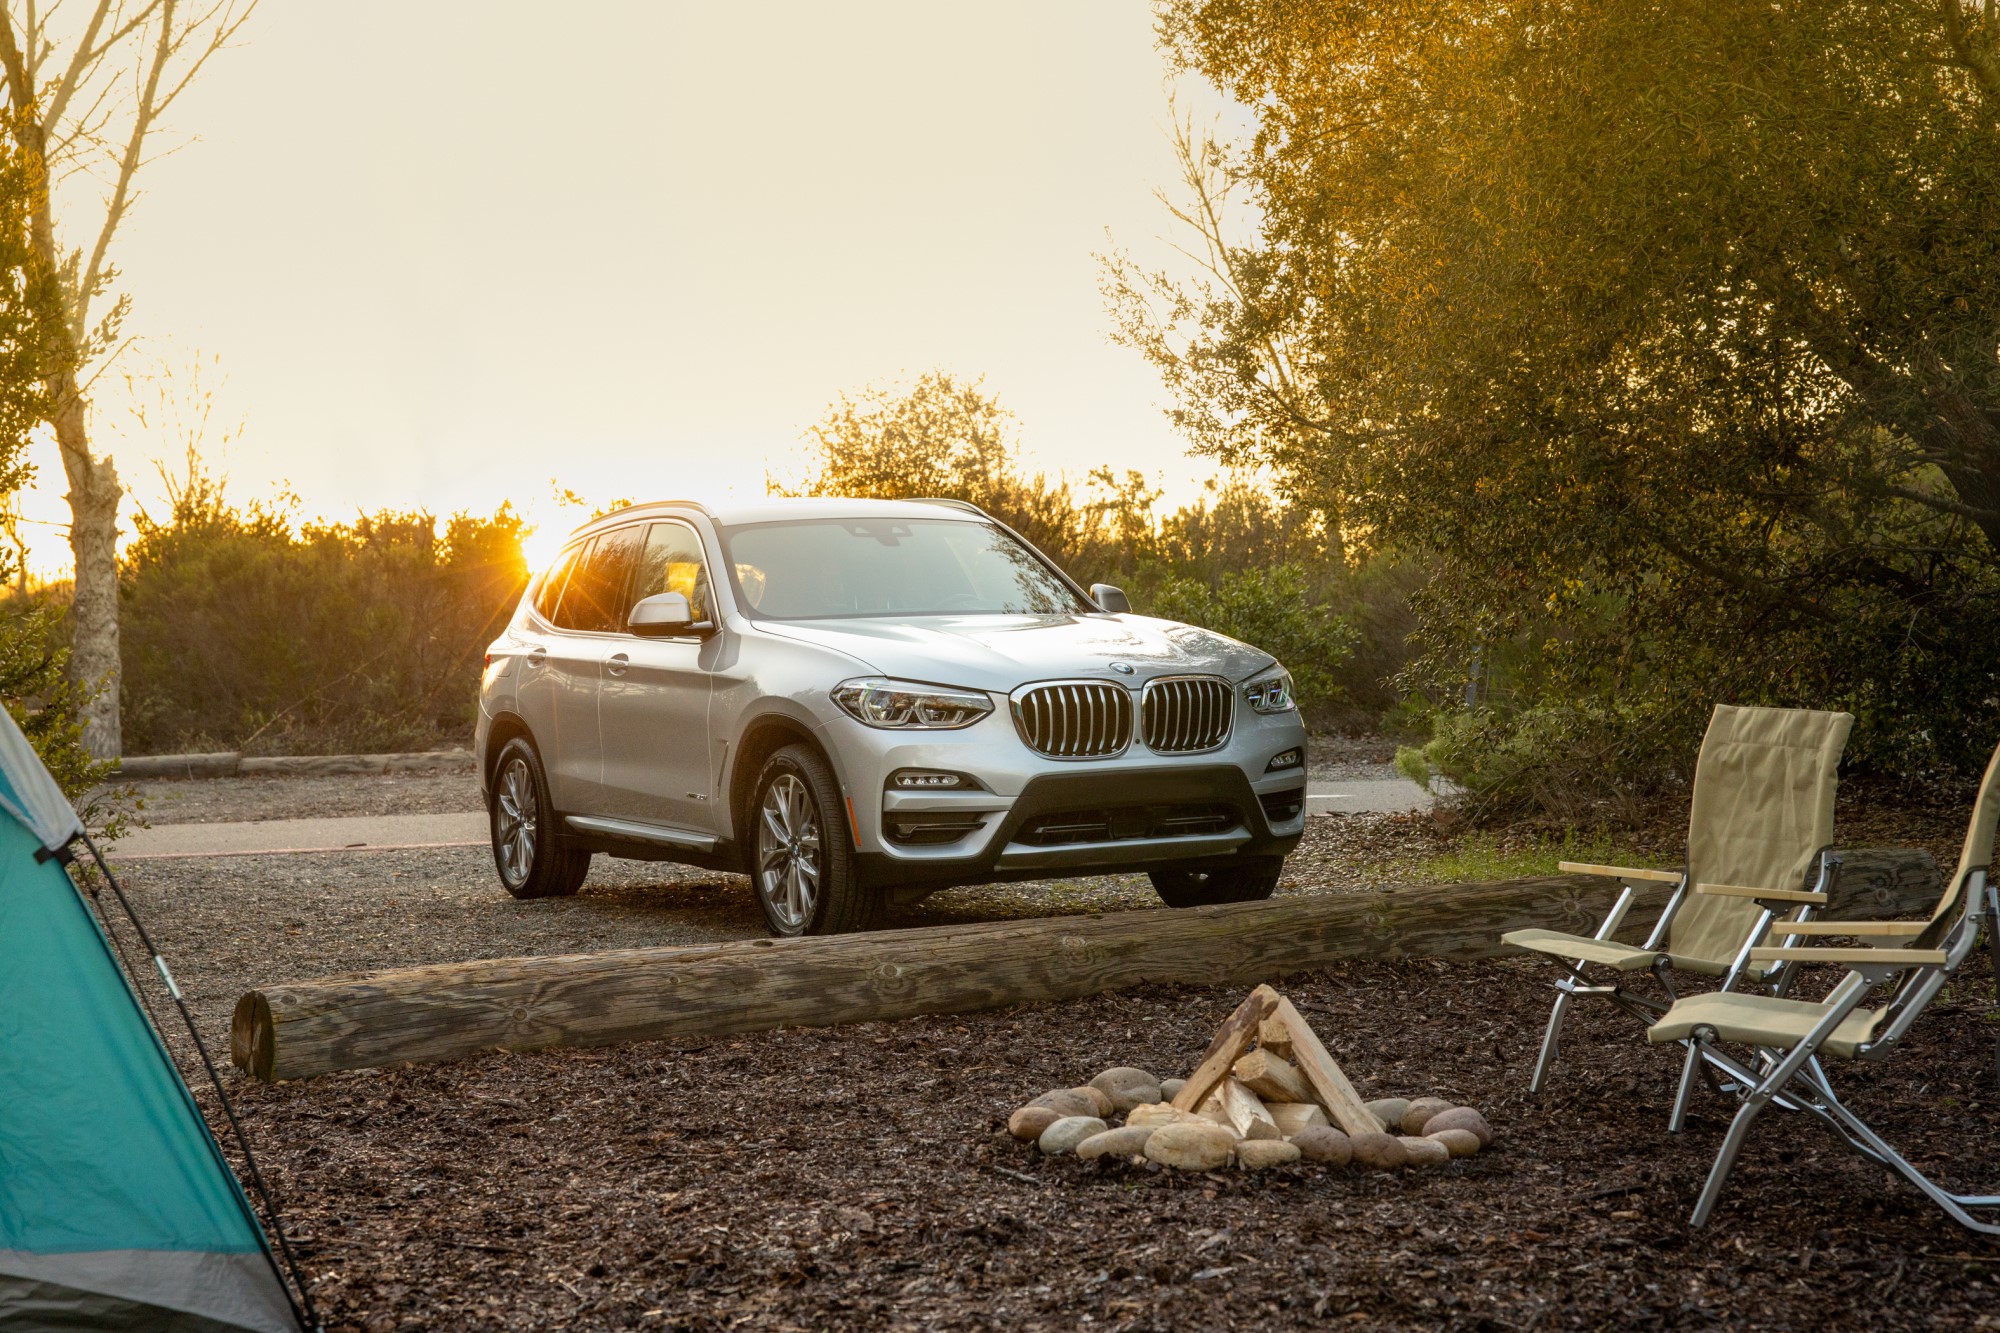 BMW SUV available in Boise, ID at Peterson BMW